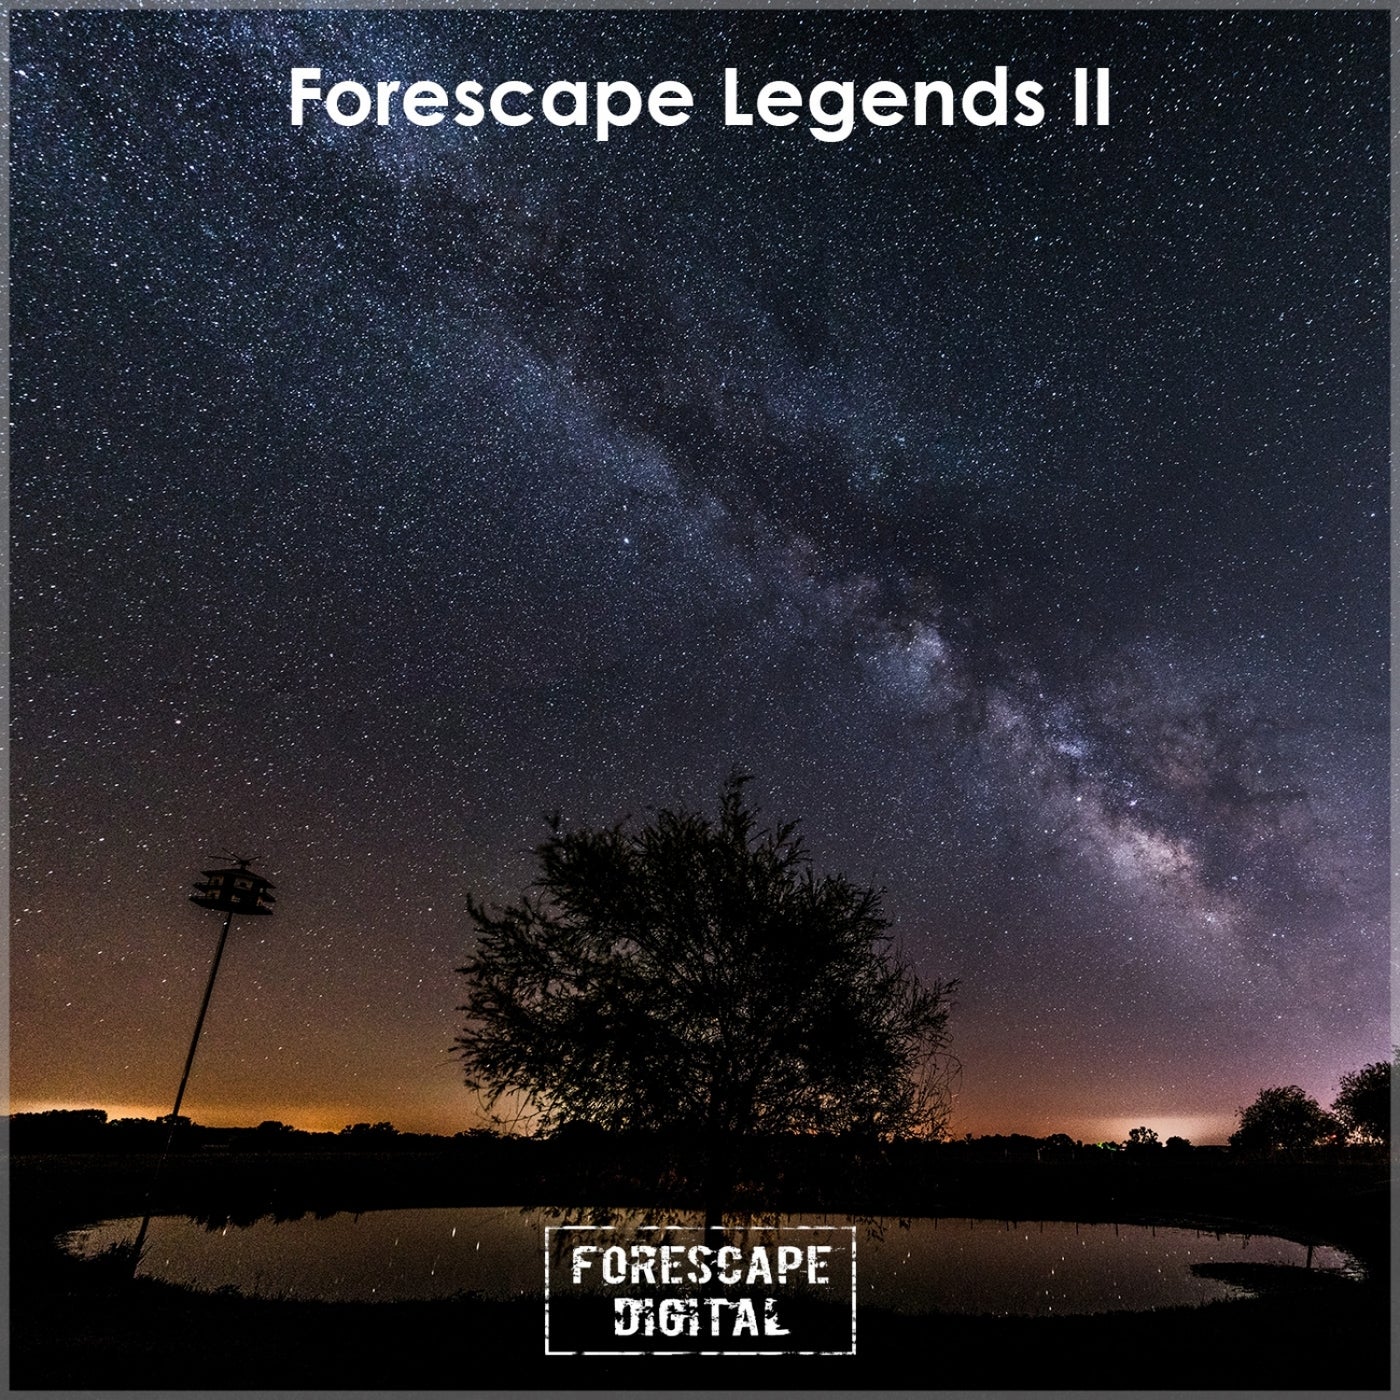 Forescape Legends II